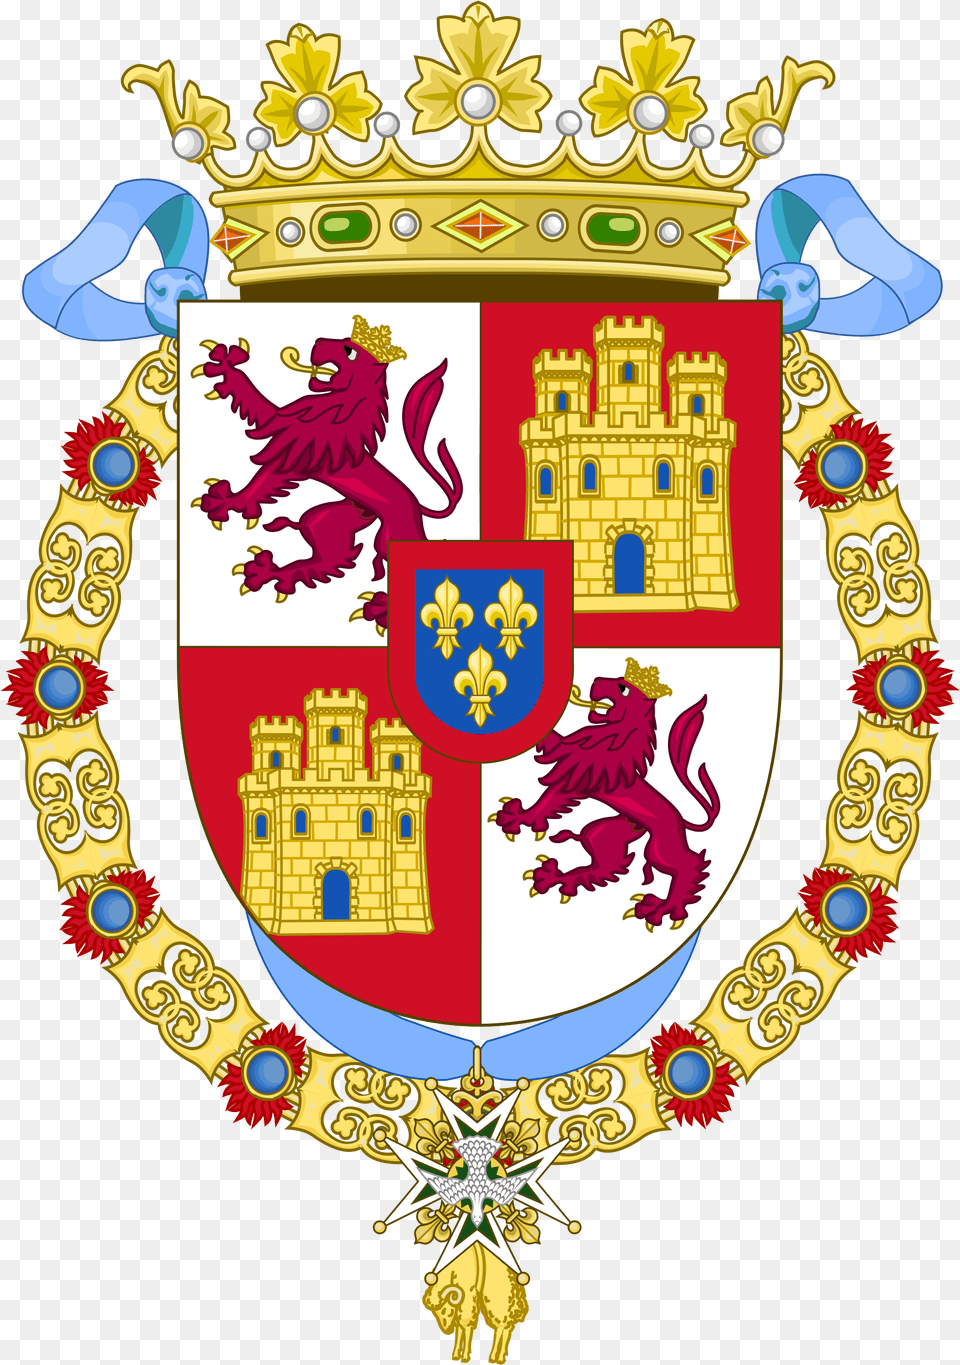 Royal Coat Of Arms Of The Crown Of Castile Preference Coat Of Arms Of Felipe Vi, Toy, Emblem, Symbol, Baby Free Transparent Png